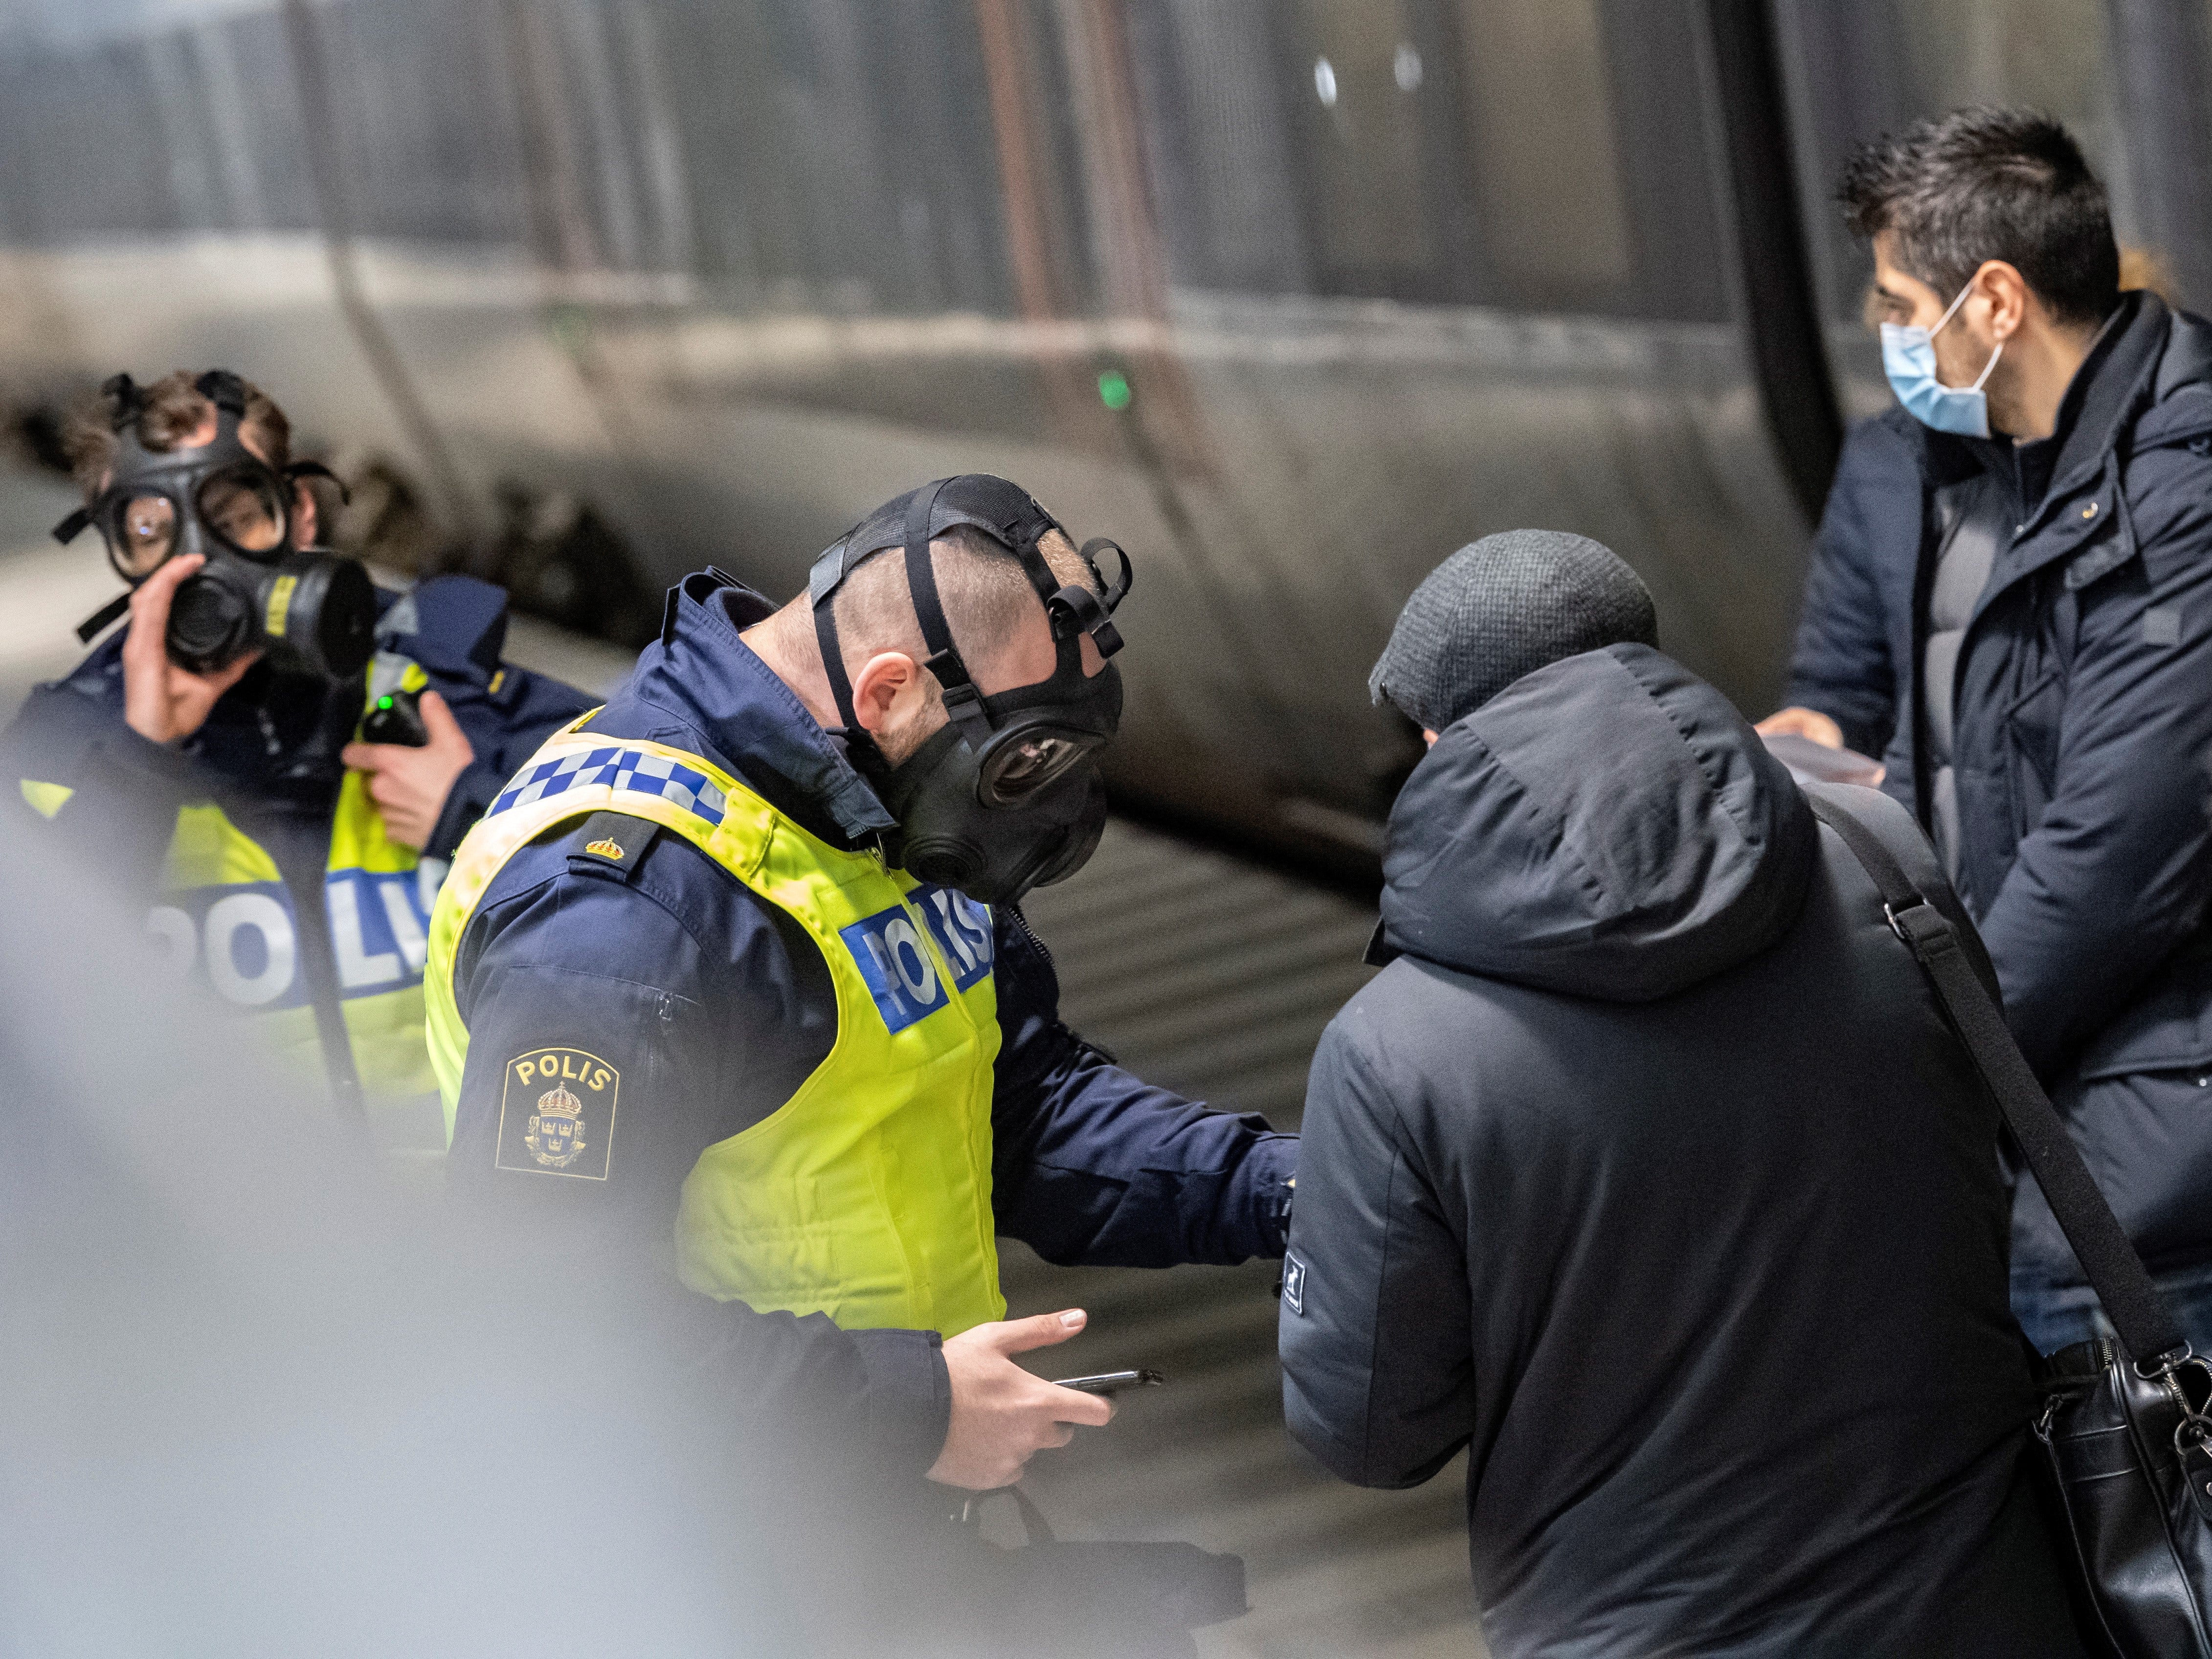 Travellers from Denmark are met by Swedish police after border was briefly closed